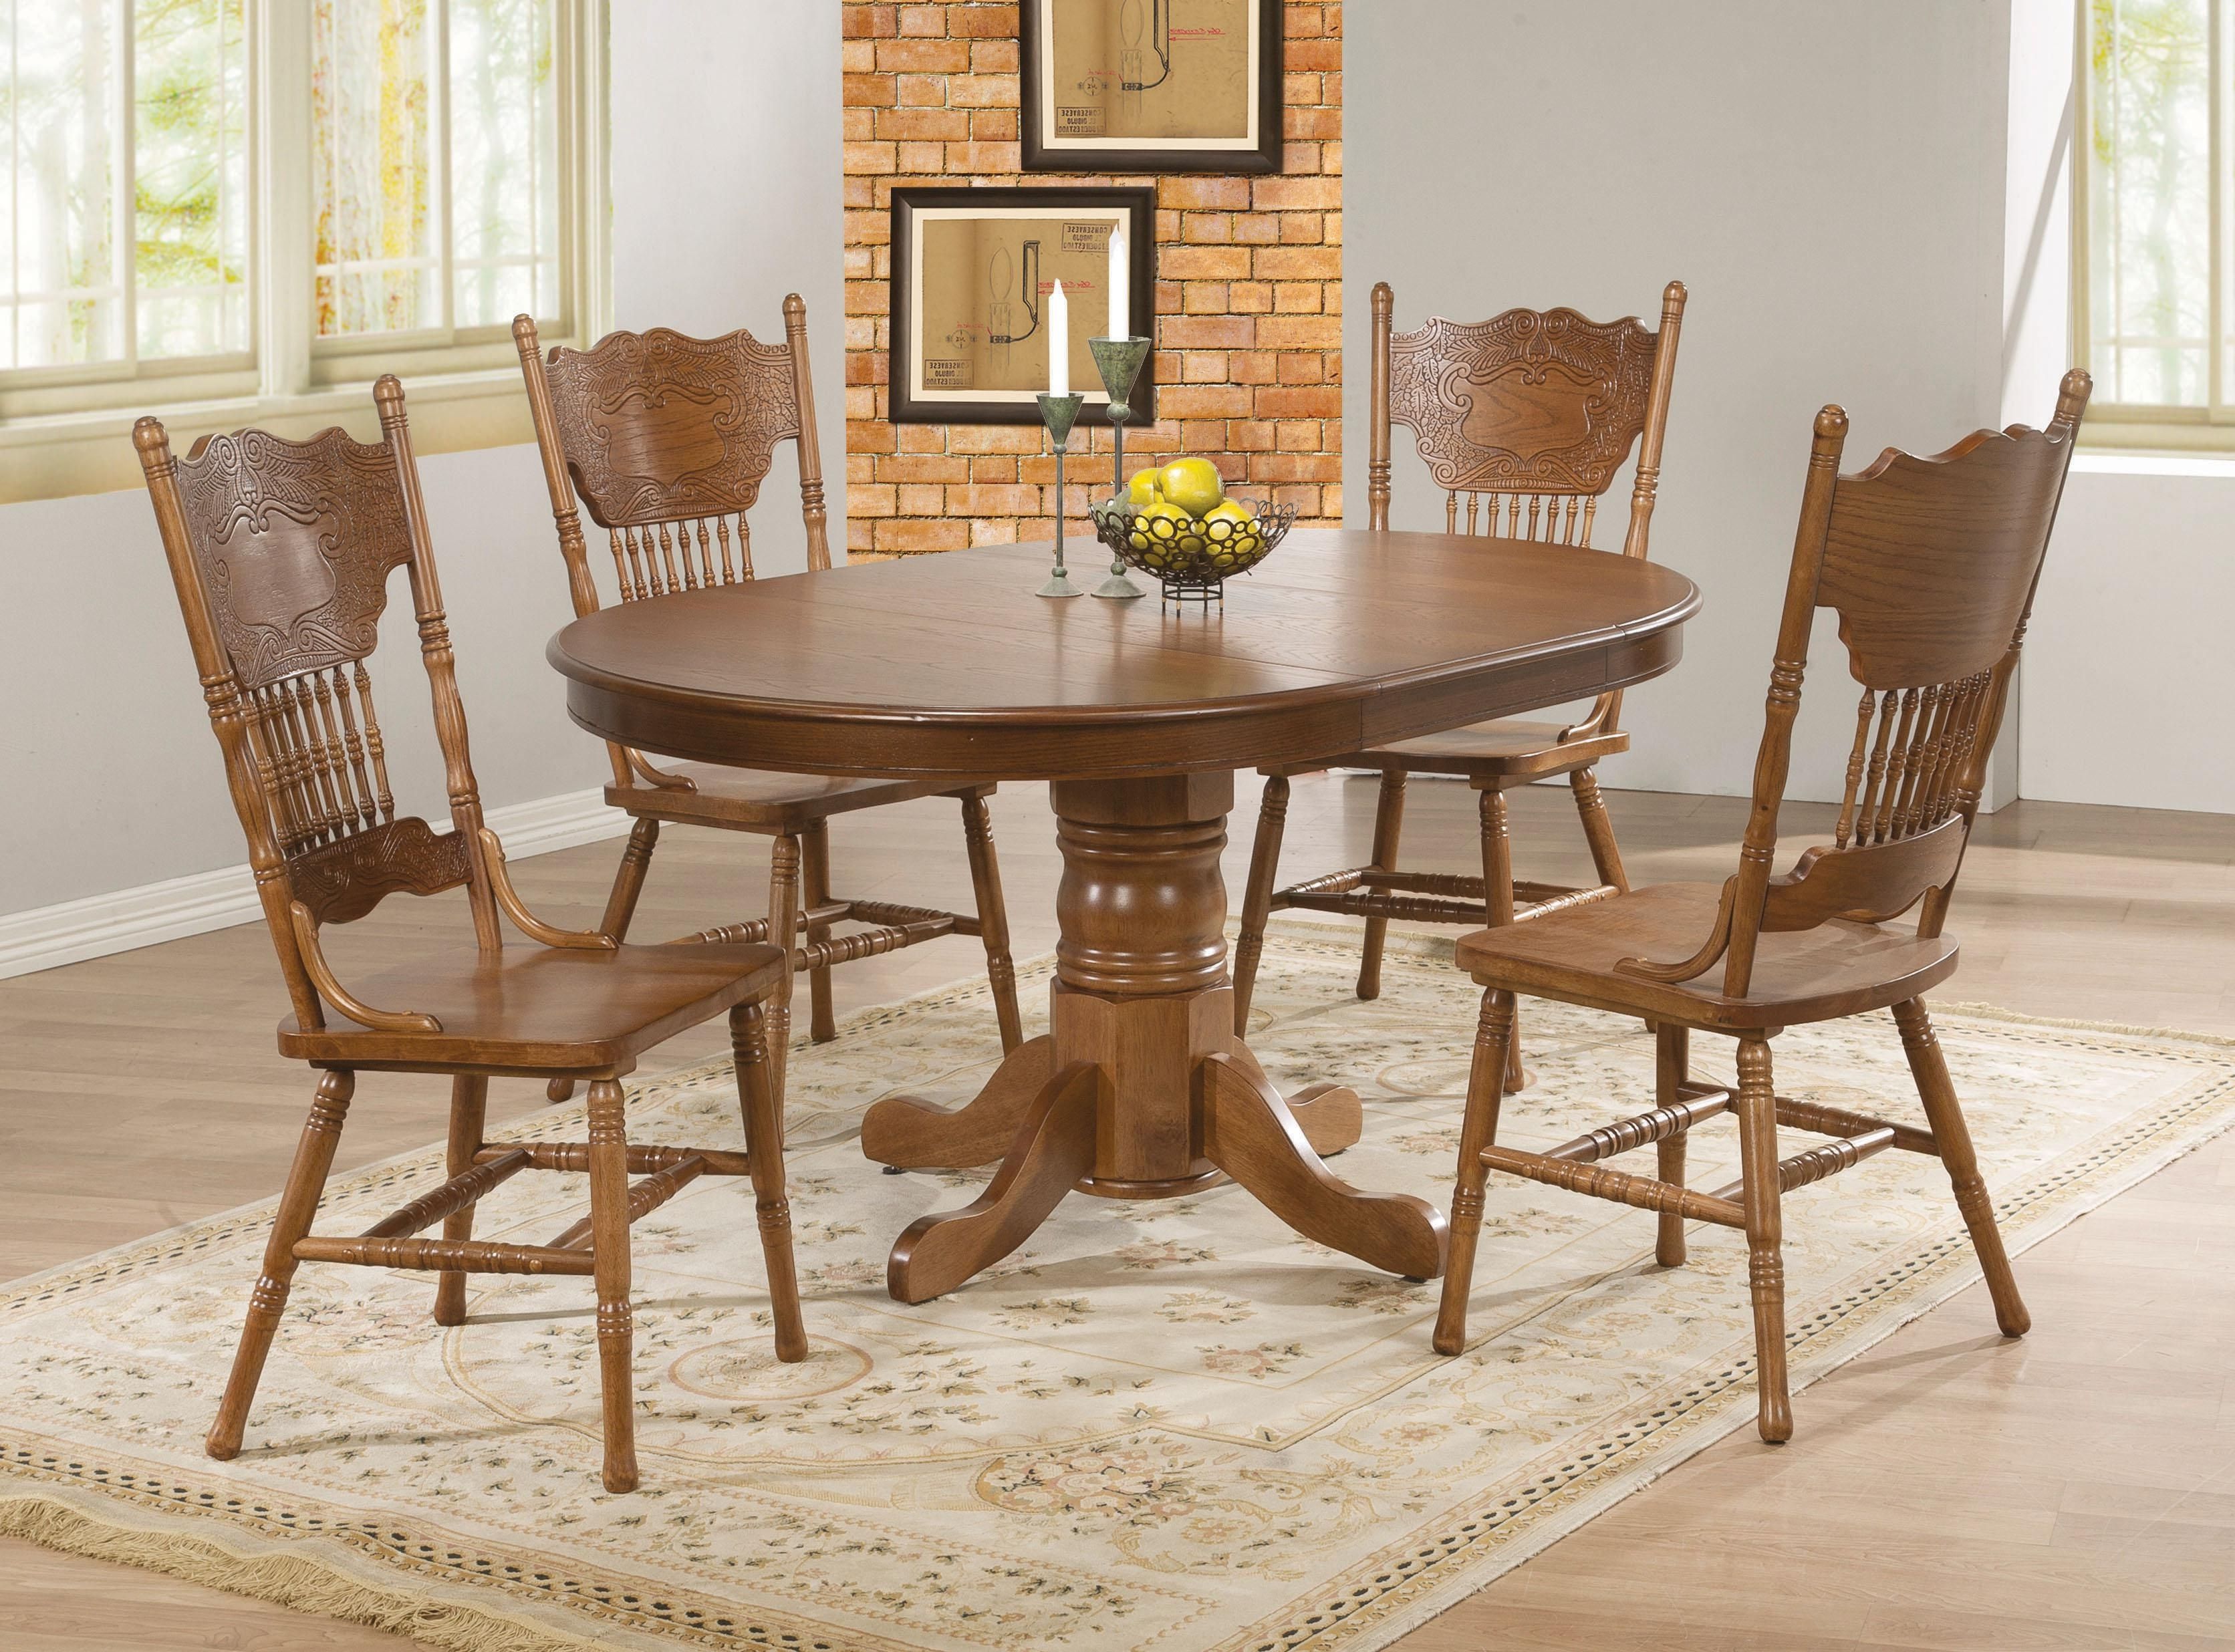 Oak And Glass Dining Tables And Chairs Pertaining To Most Recent Round Dining Table Htm Oak Oval Dining Table And Chairs As Glass (View 21 of 25)